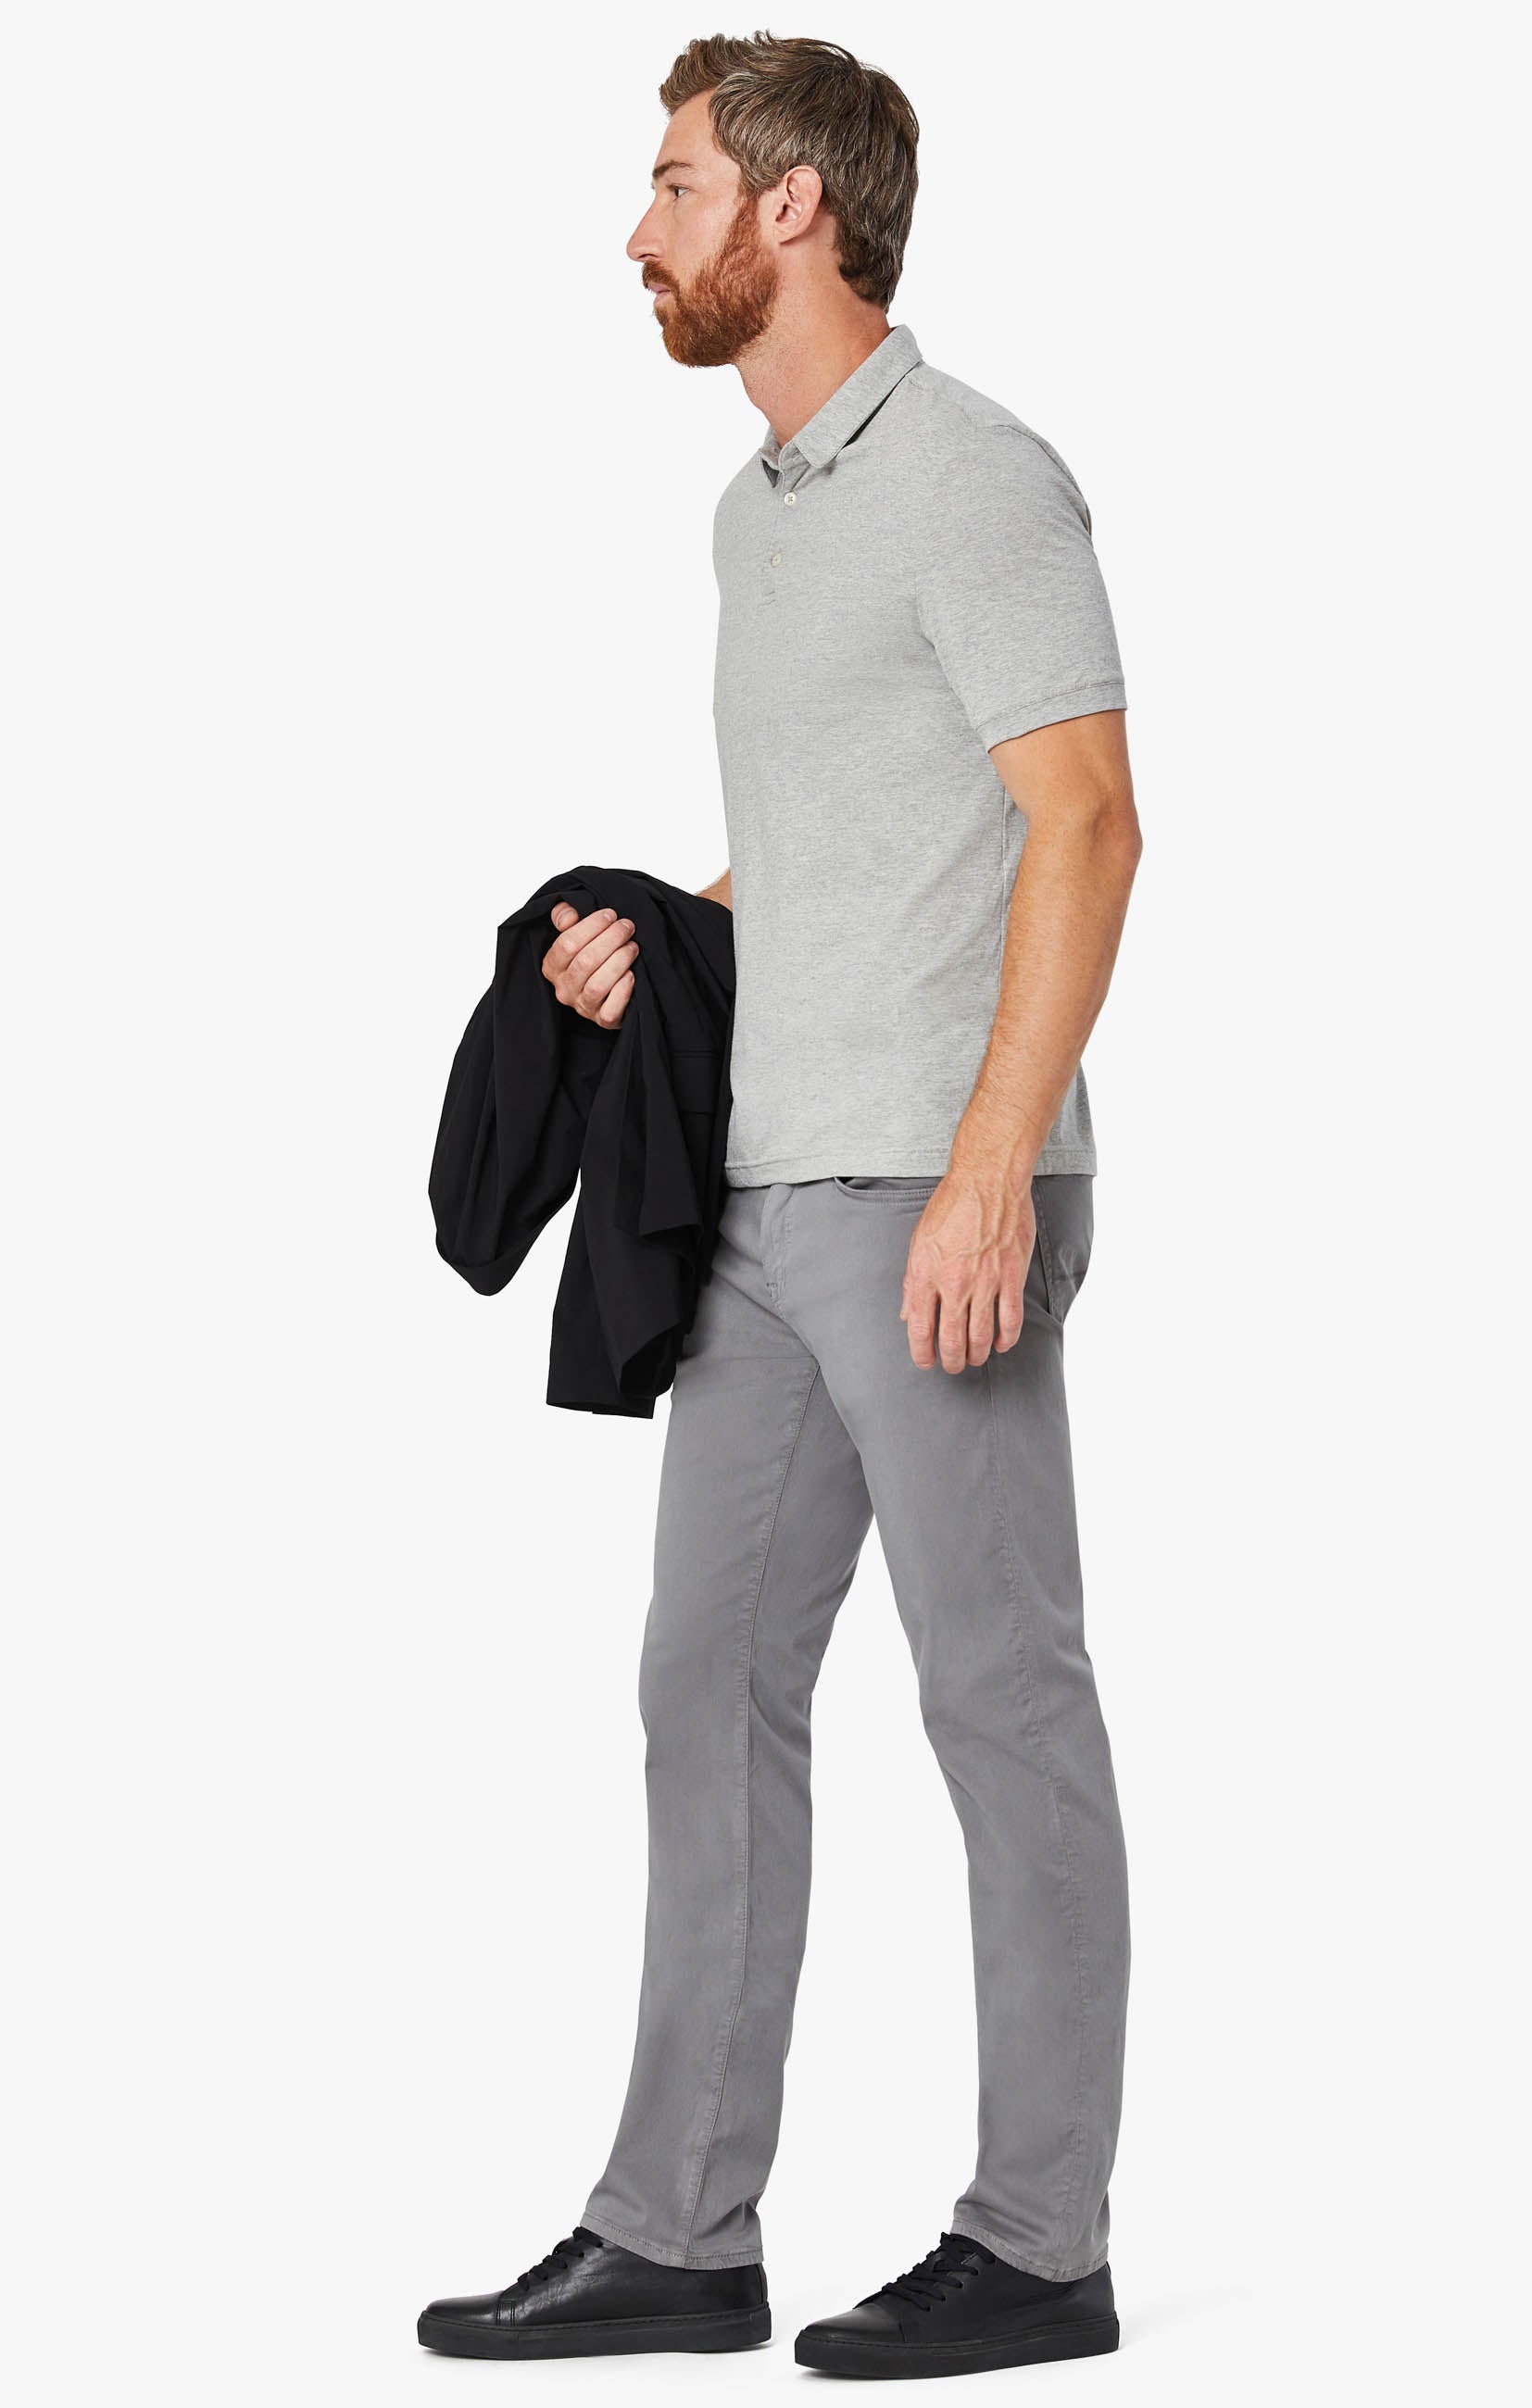 Courage Straight Leg Pants in Shark Twill Image 7